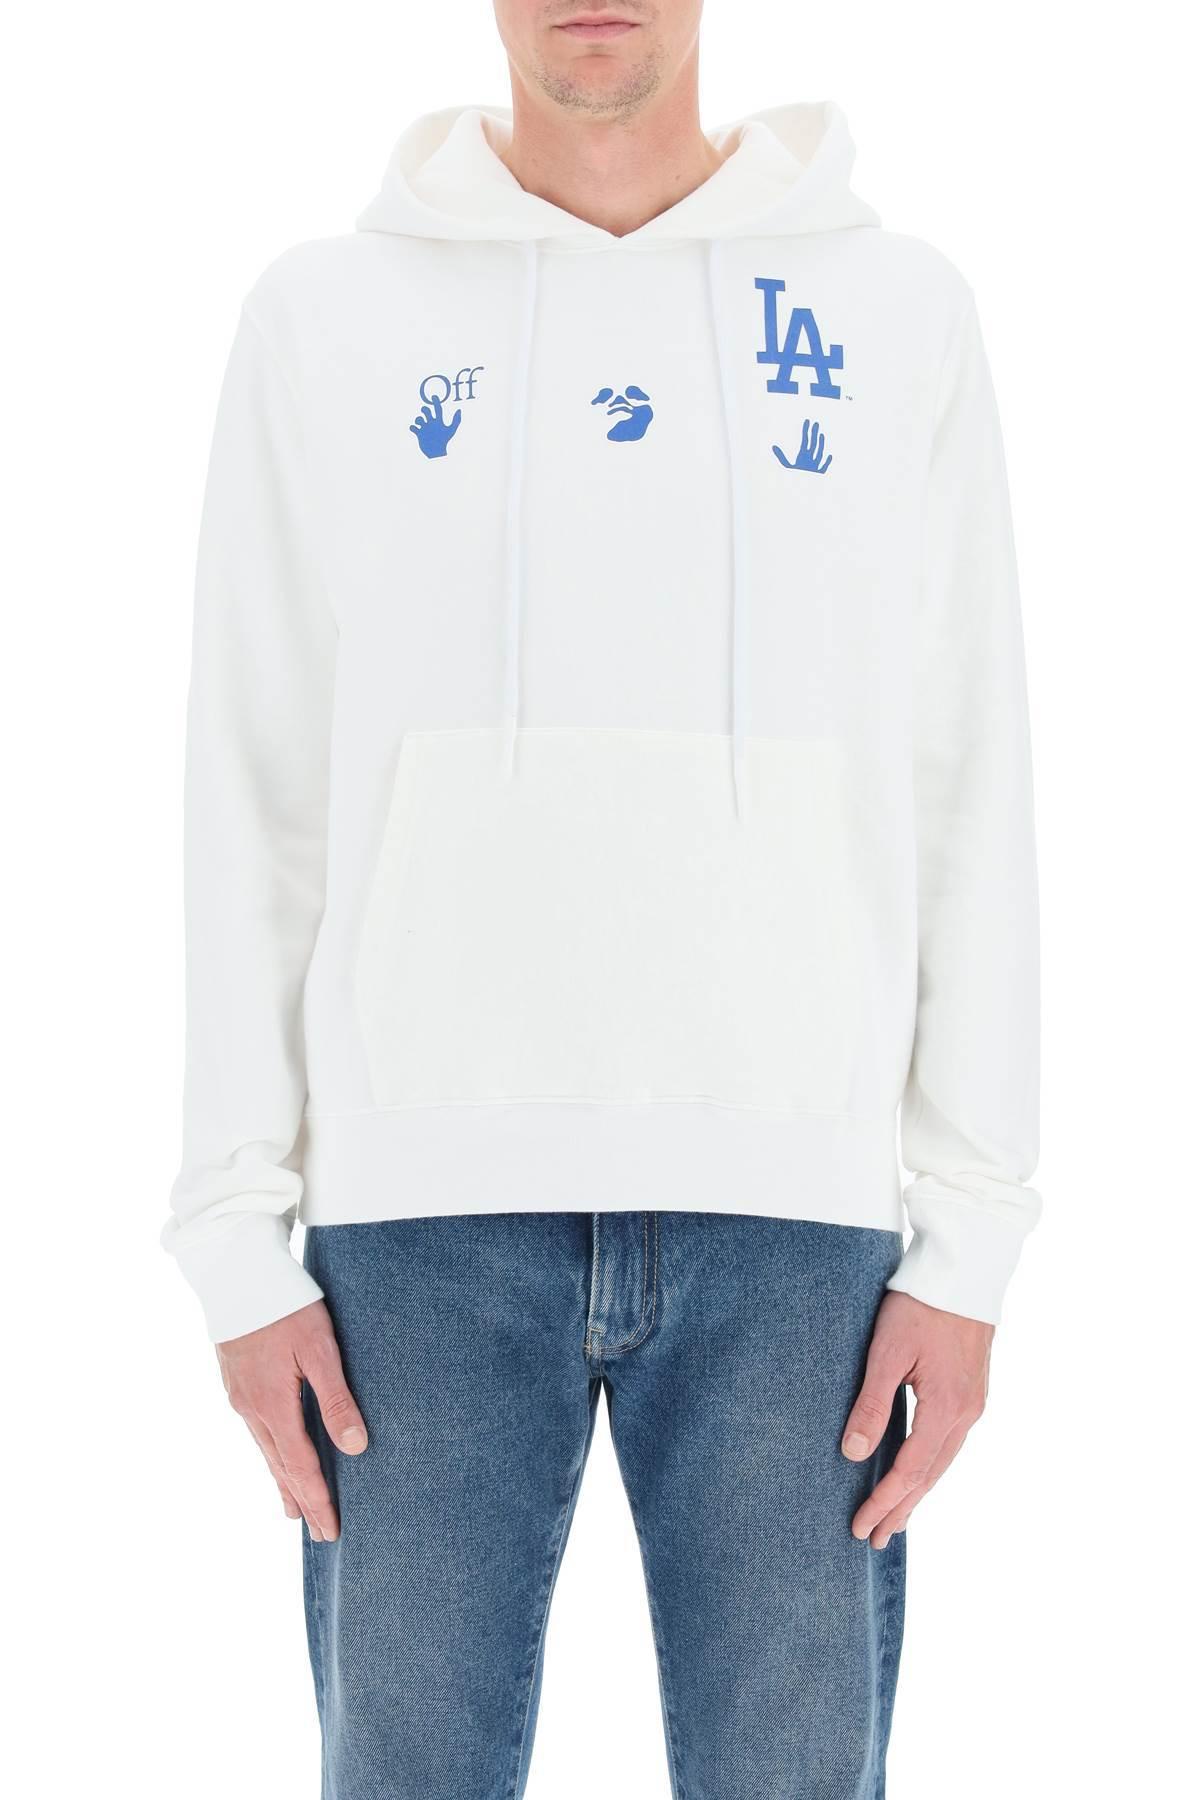 Off-White c/o Virgil Abloh Los Angeles Dodgers Hoodie X Mlb in White for | Lyst